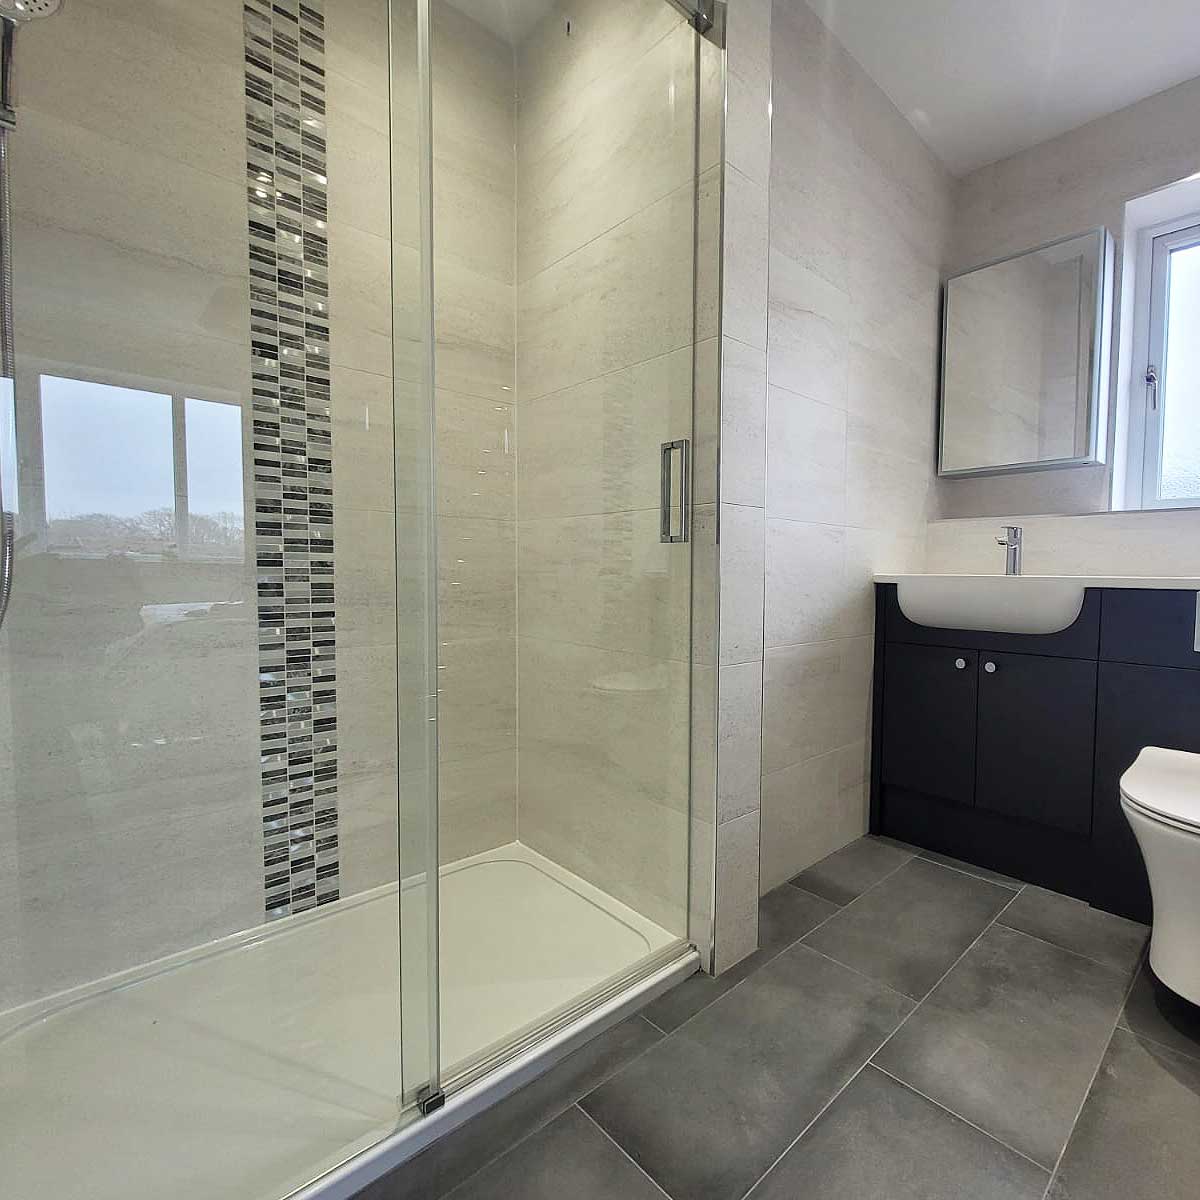 Enlarged shower in this modern ensuite in Lytchett Matravers was created by taking some space from a large built-in wardrobe in the main bedroom